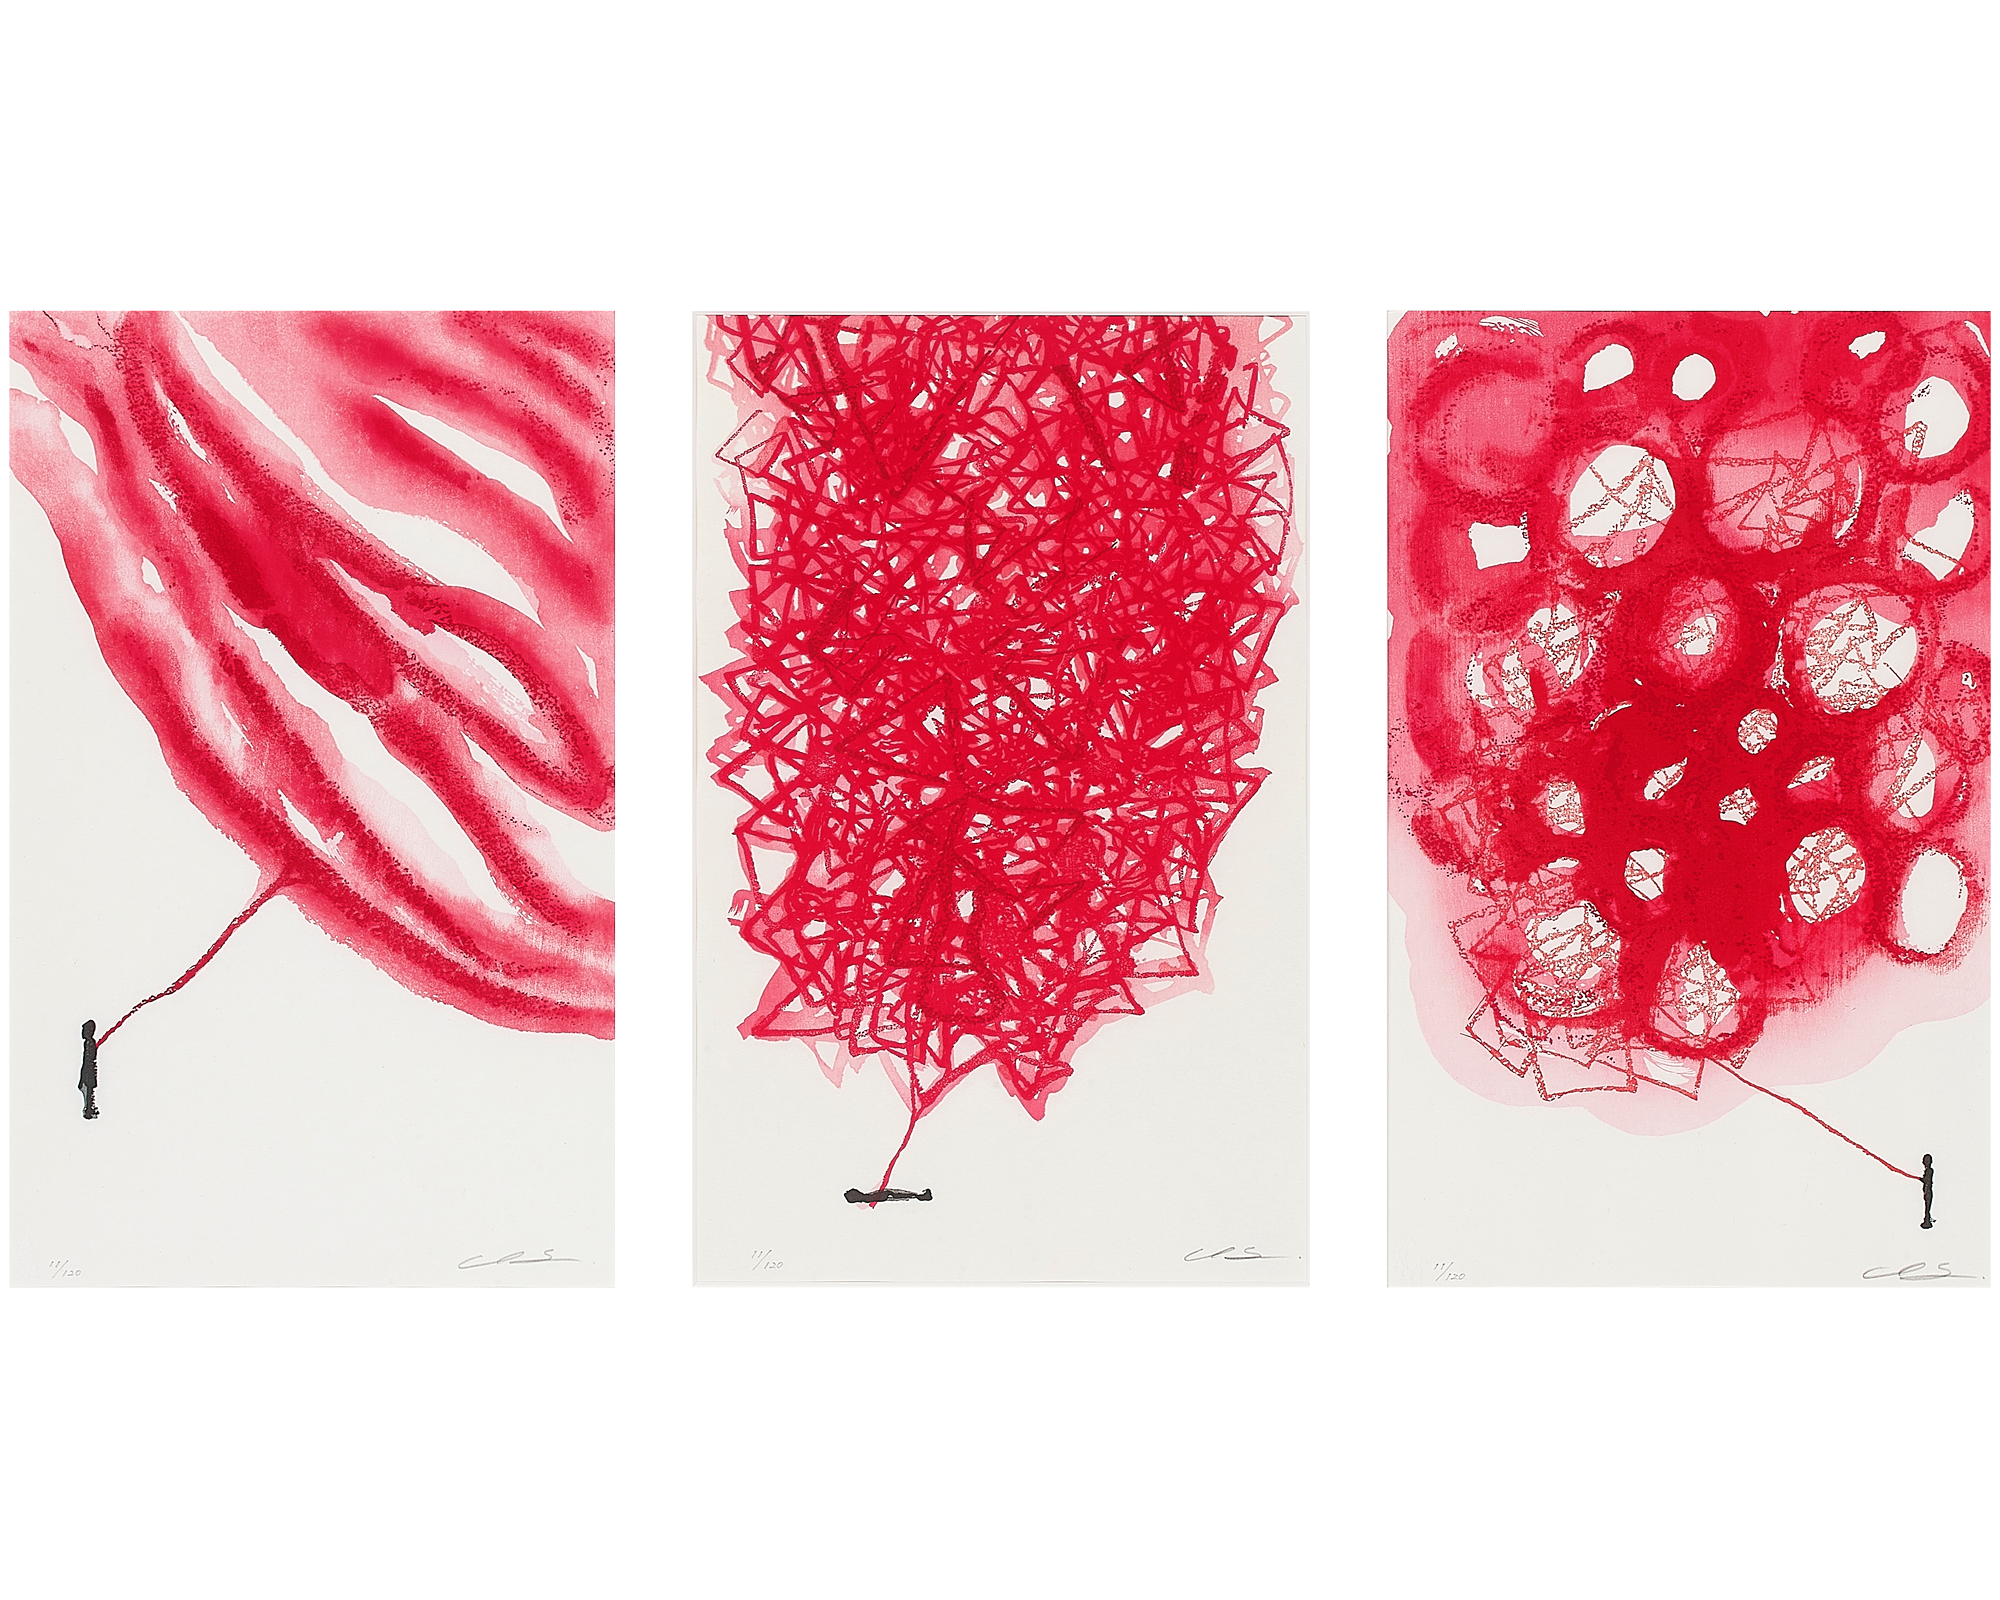 Connected to the Universe - Red Waves, Red Lines, Red Circles - a set of 3 prints